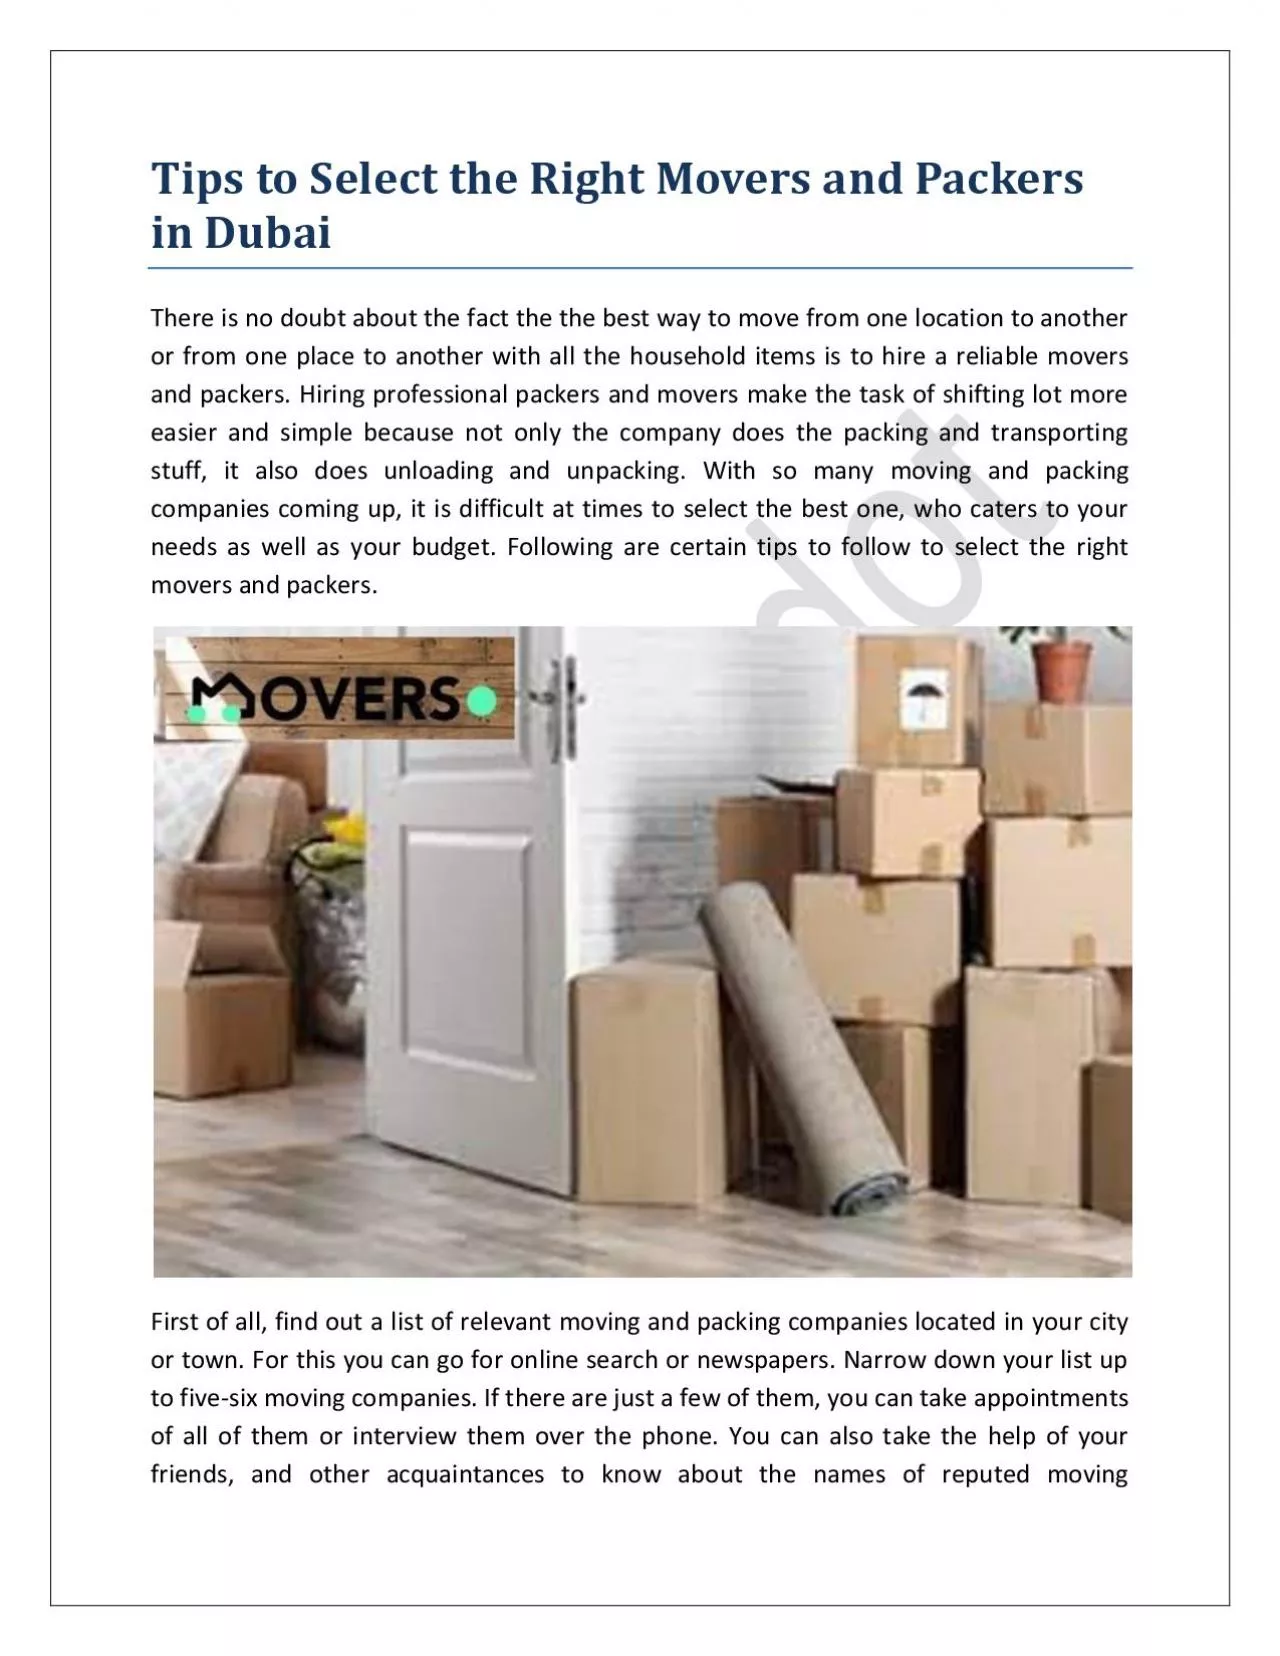 Tips to Select the Right Movers and Packers in Dubai